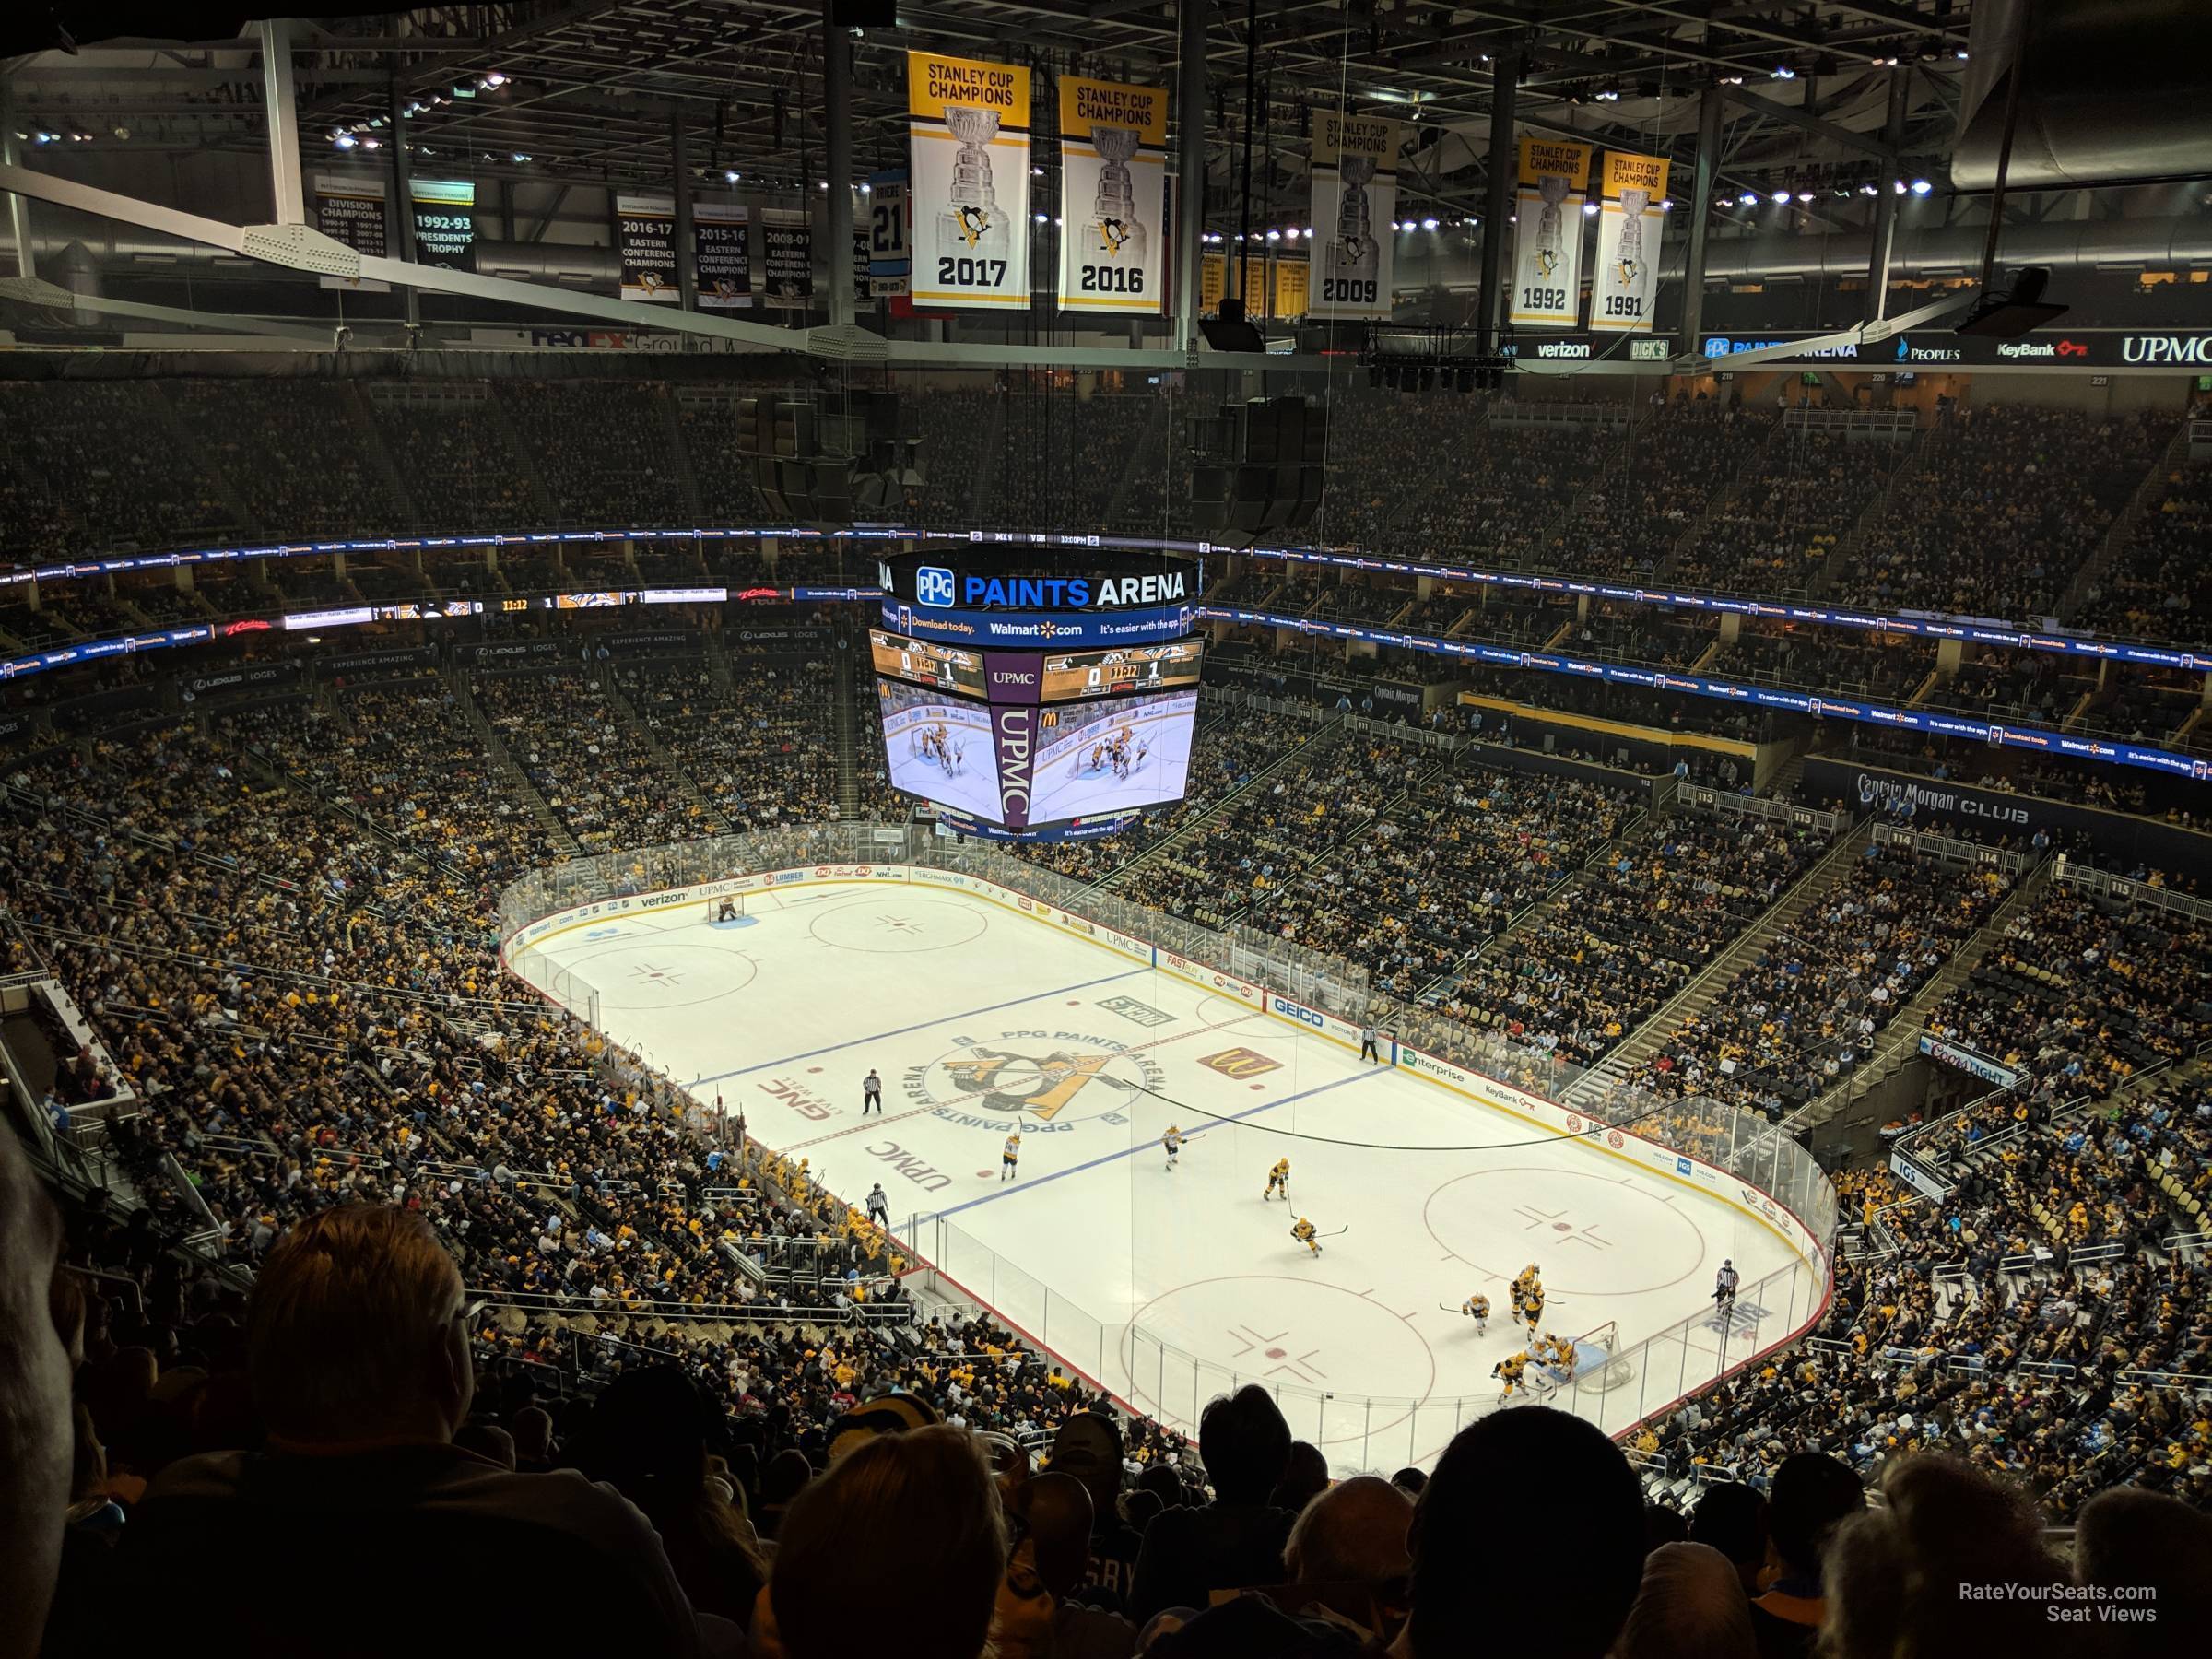 section 232, row sro seat view  for hockey - ppg paints arena